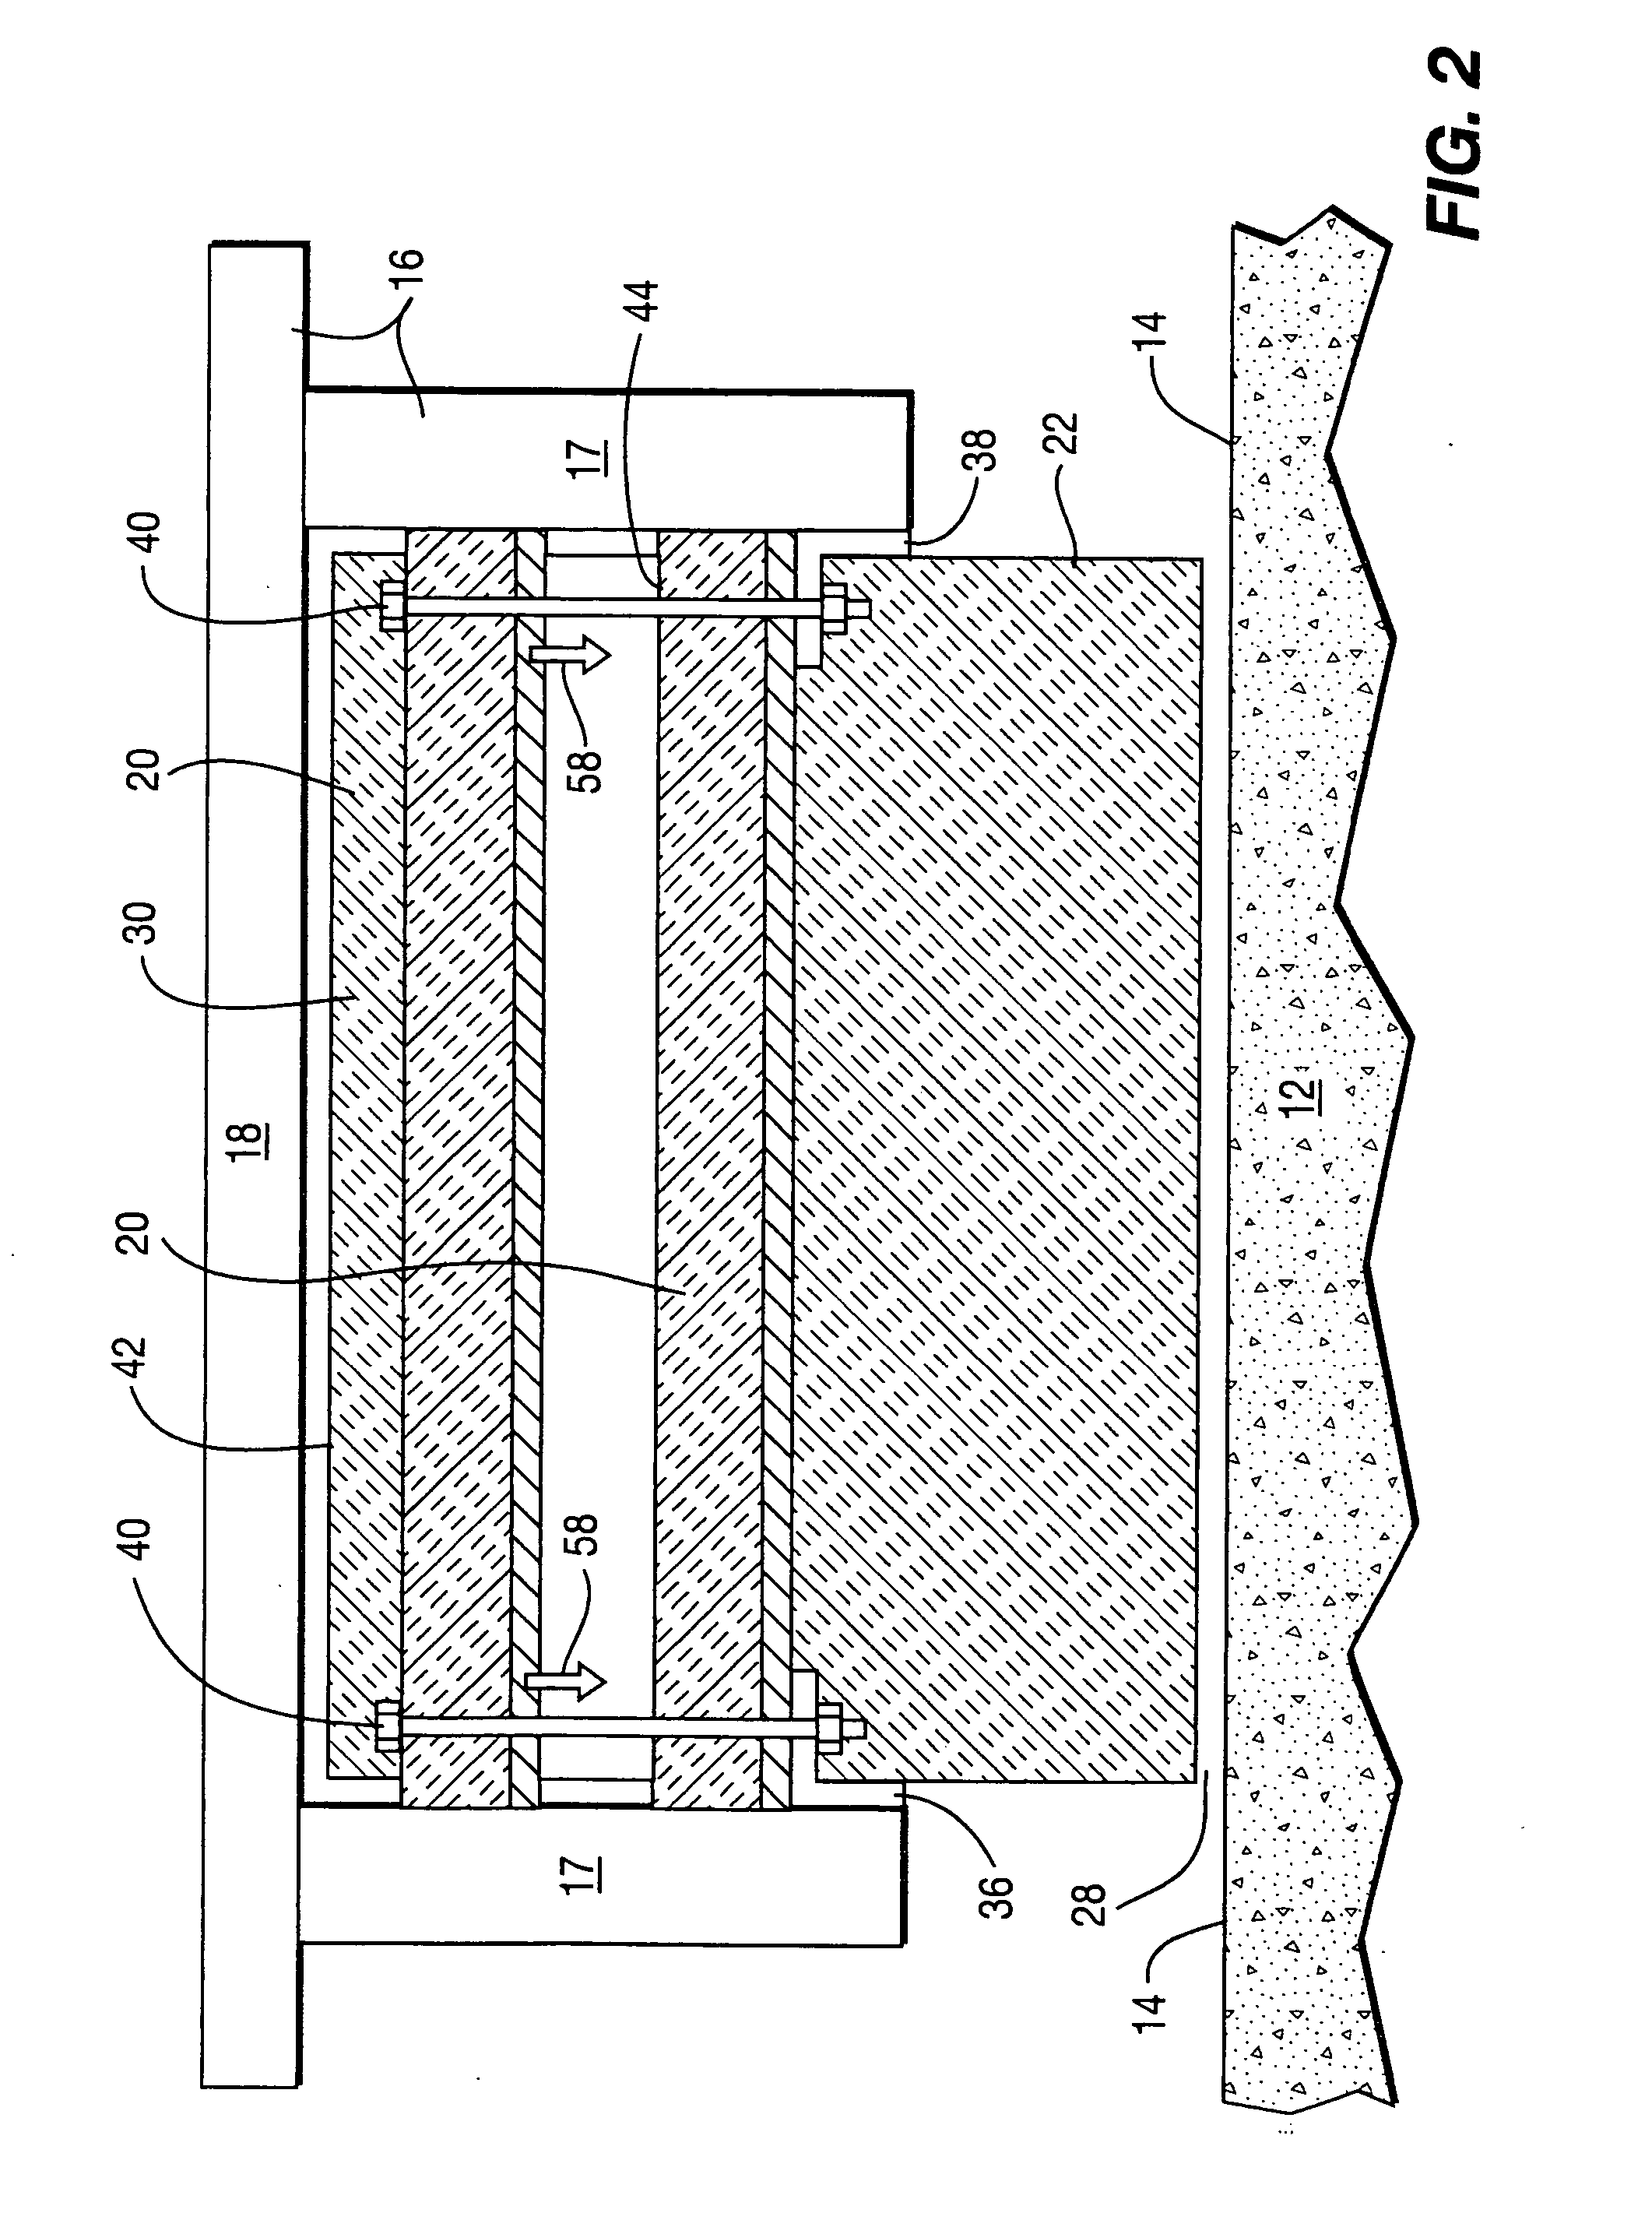 Means and method for fireproof sealing between the peripheral edge of individual floors of a building and the exterior wall structure thereof